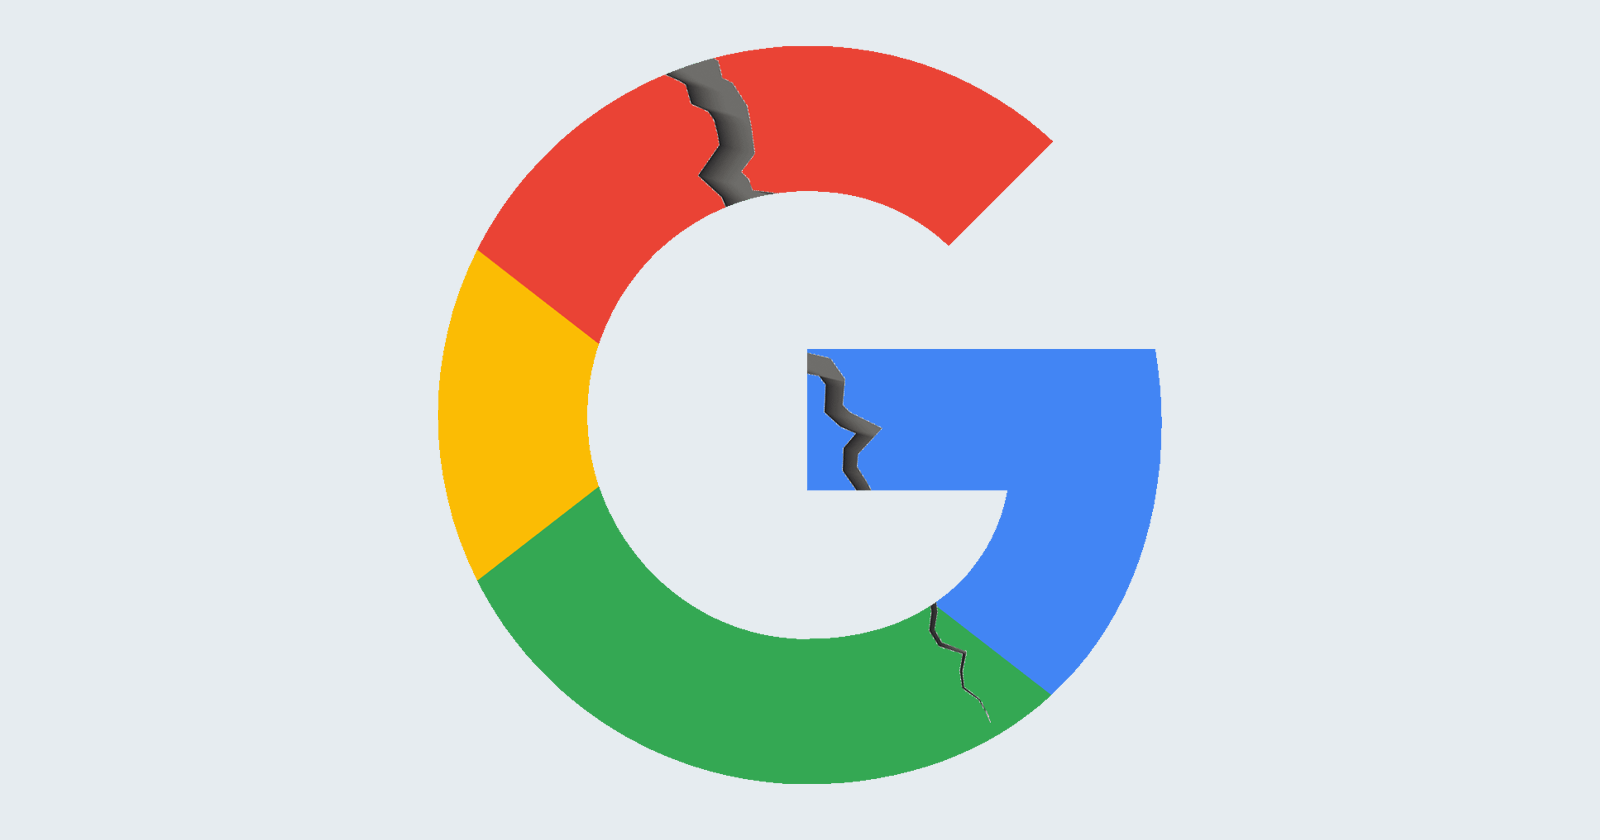 Google announced indexing outage